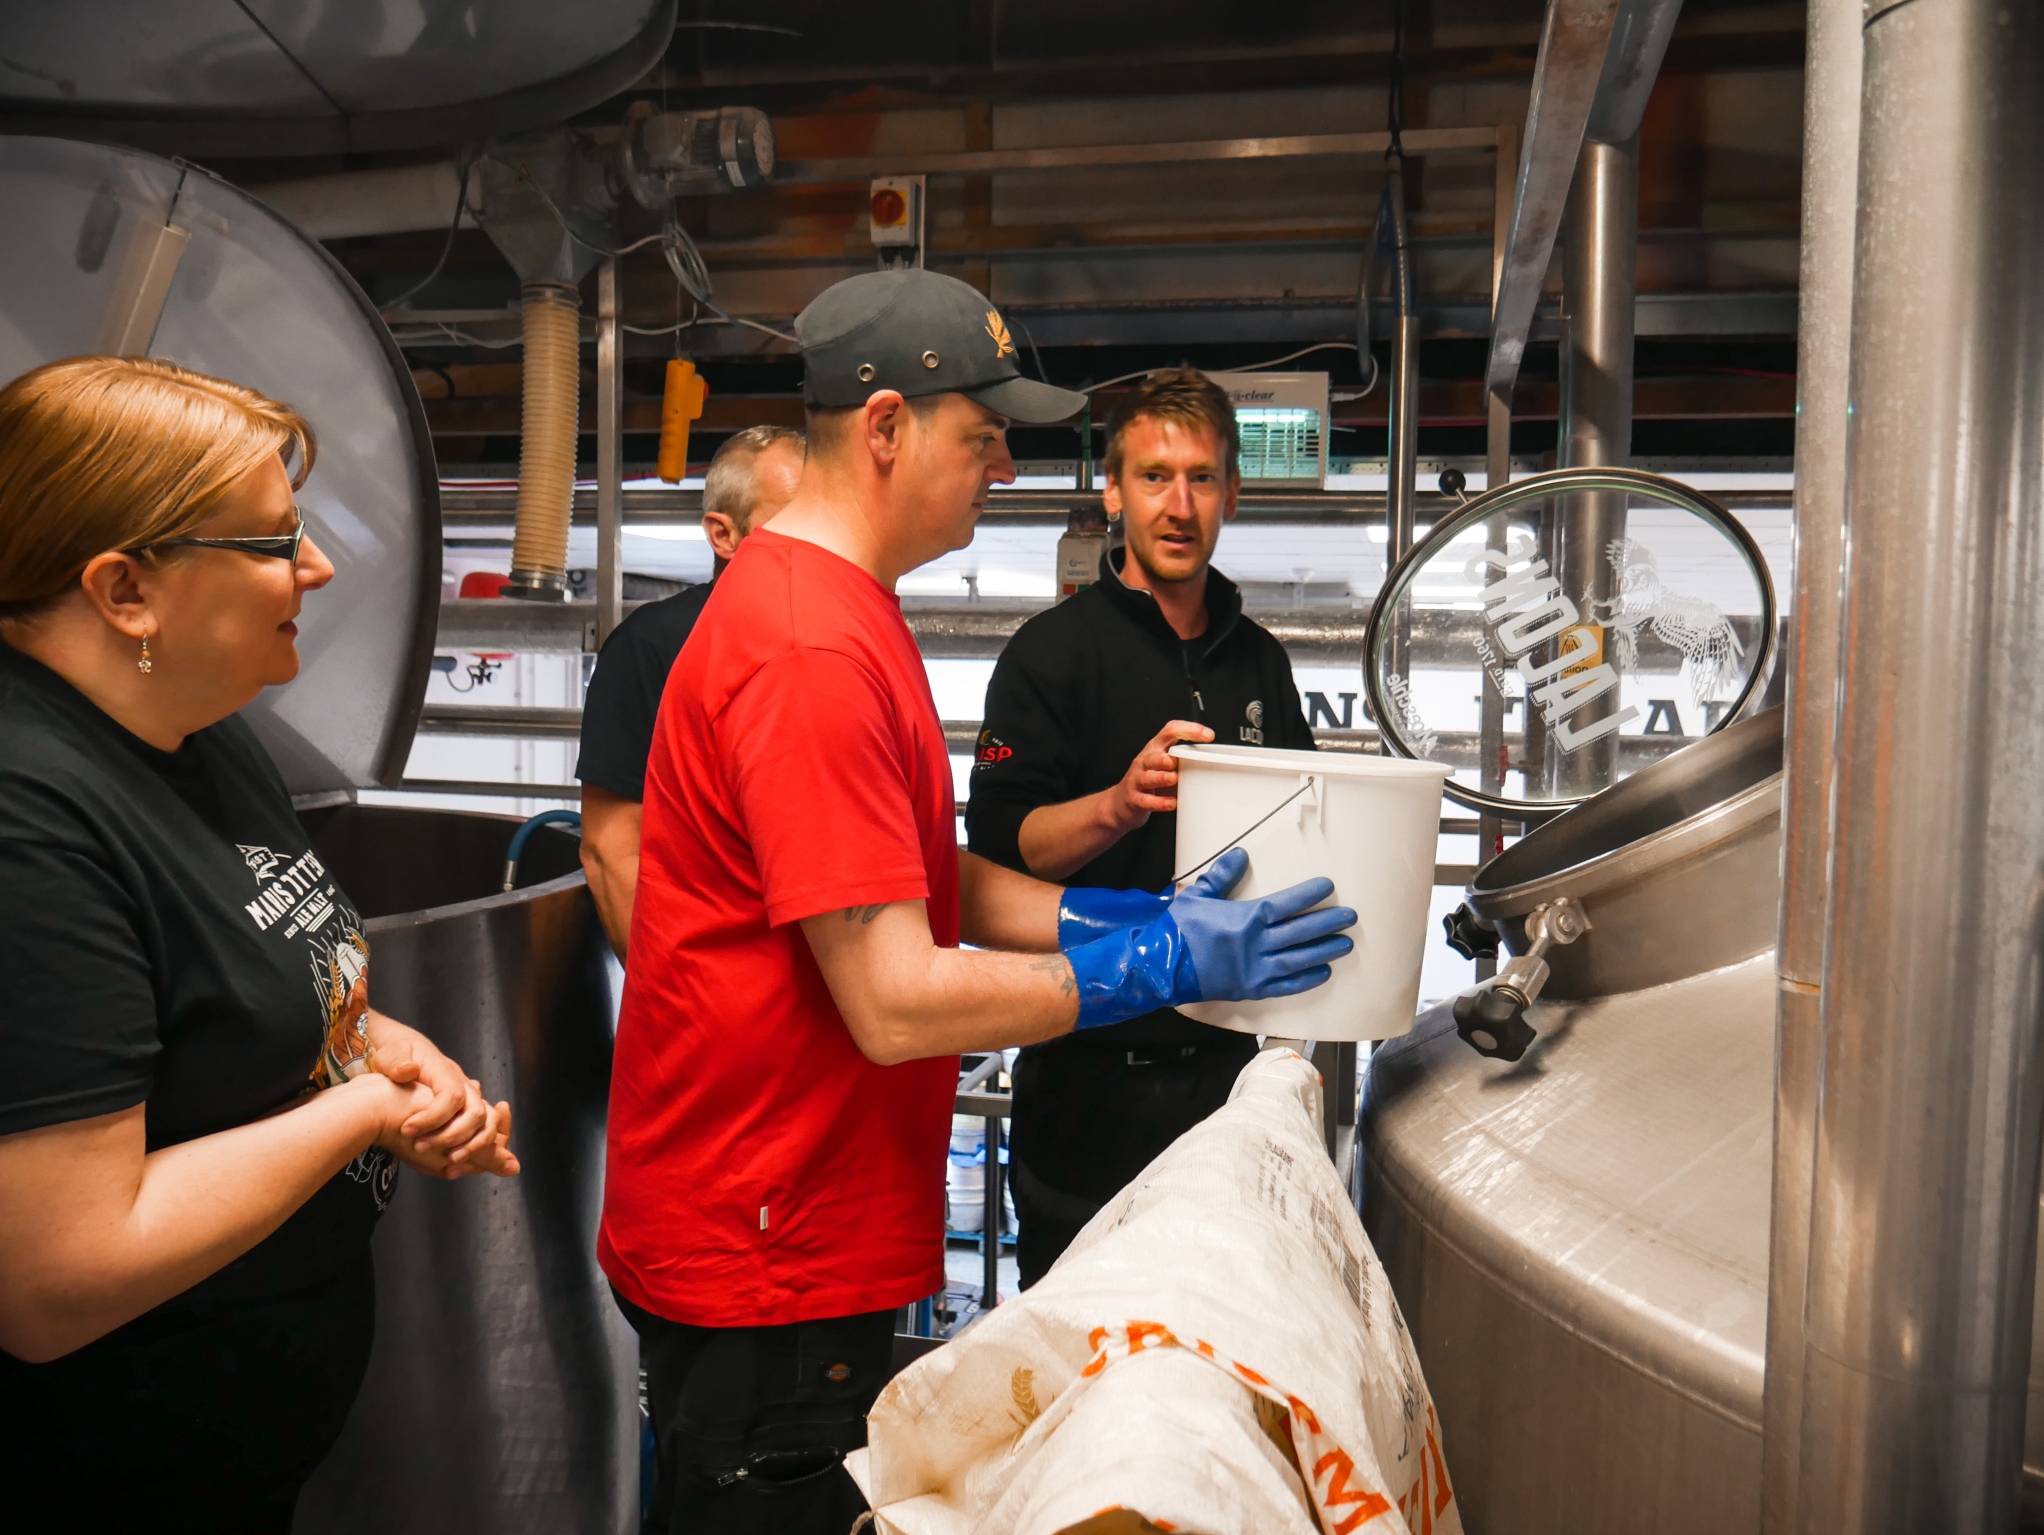 Award winning craft brewers Lacon's in Great Yarmouth Norfolk, on a brew day as part of our brewing case study.